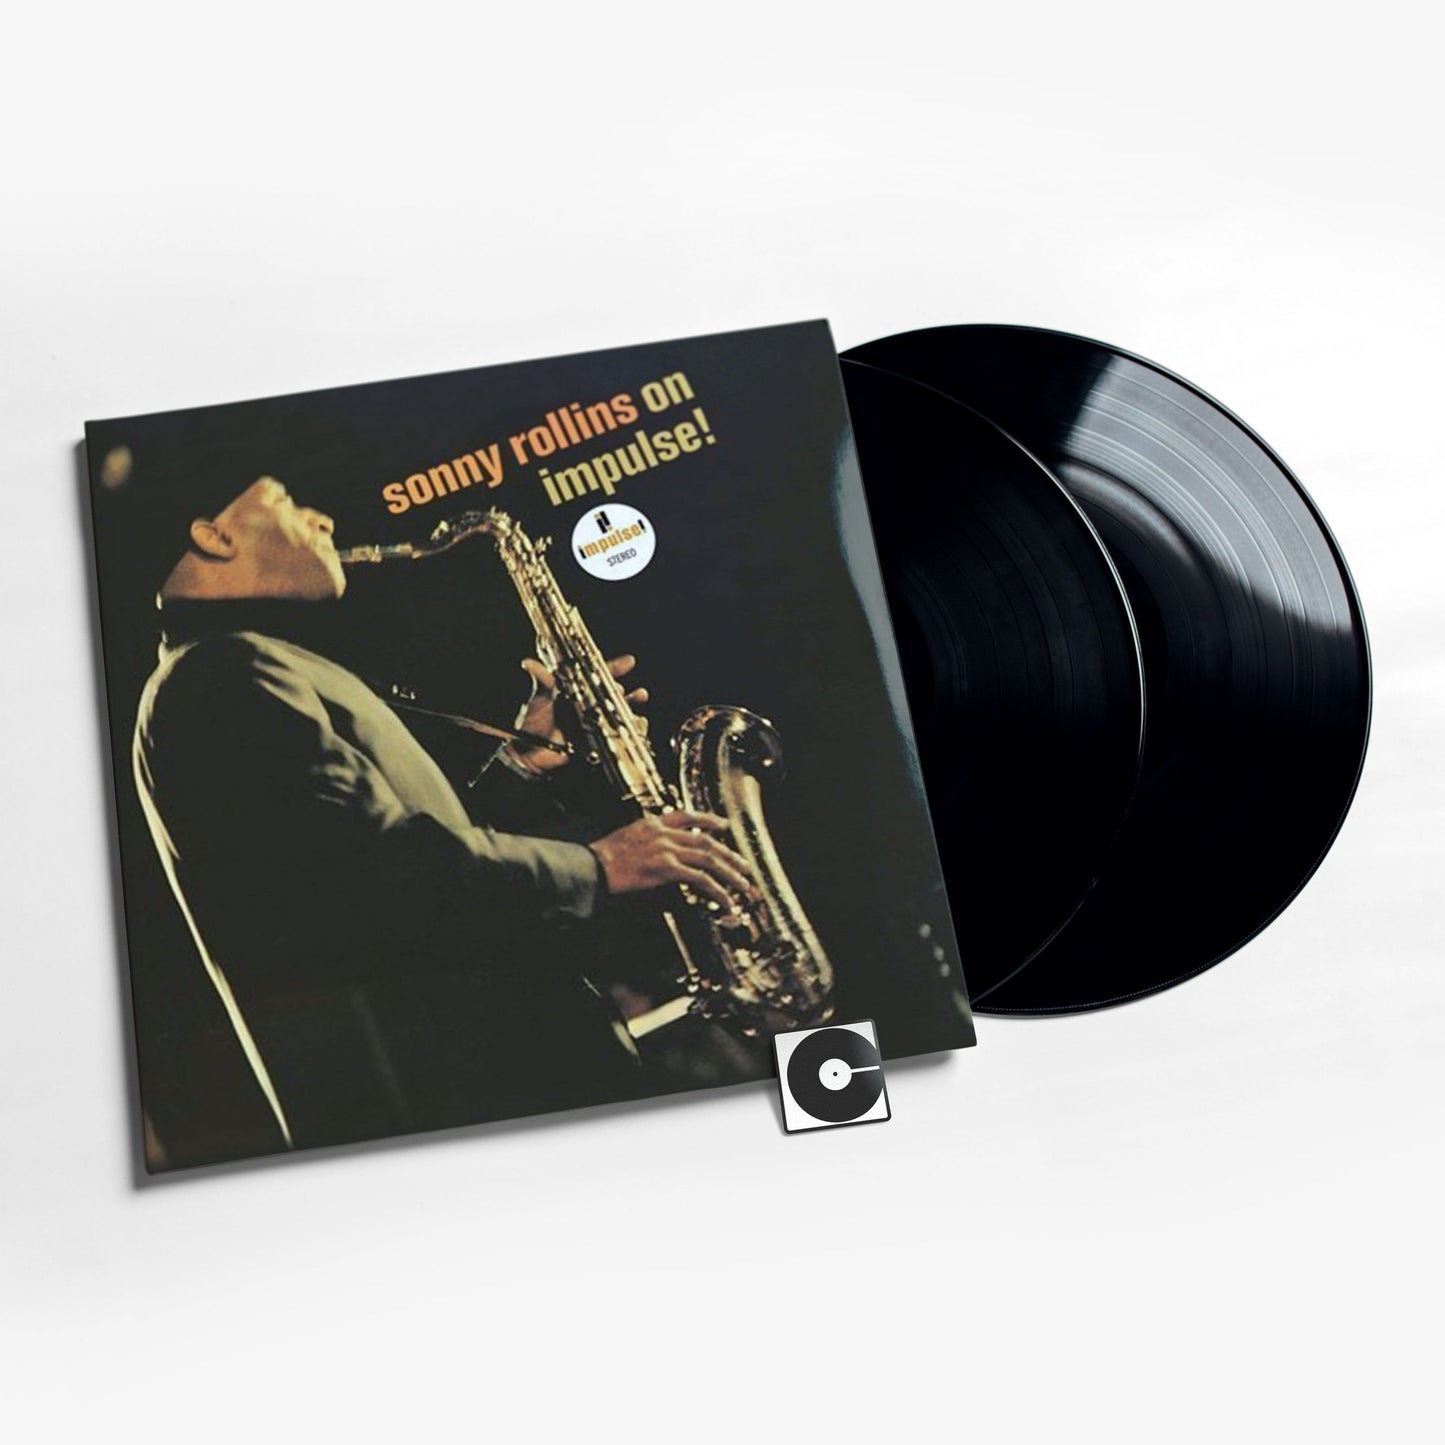 Sonny Rollins - "On Impulse!" Analogue Productions